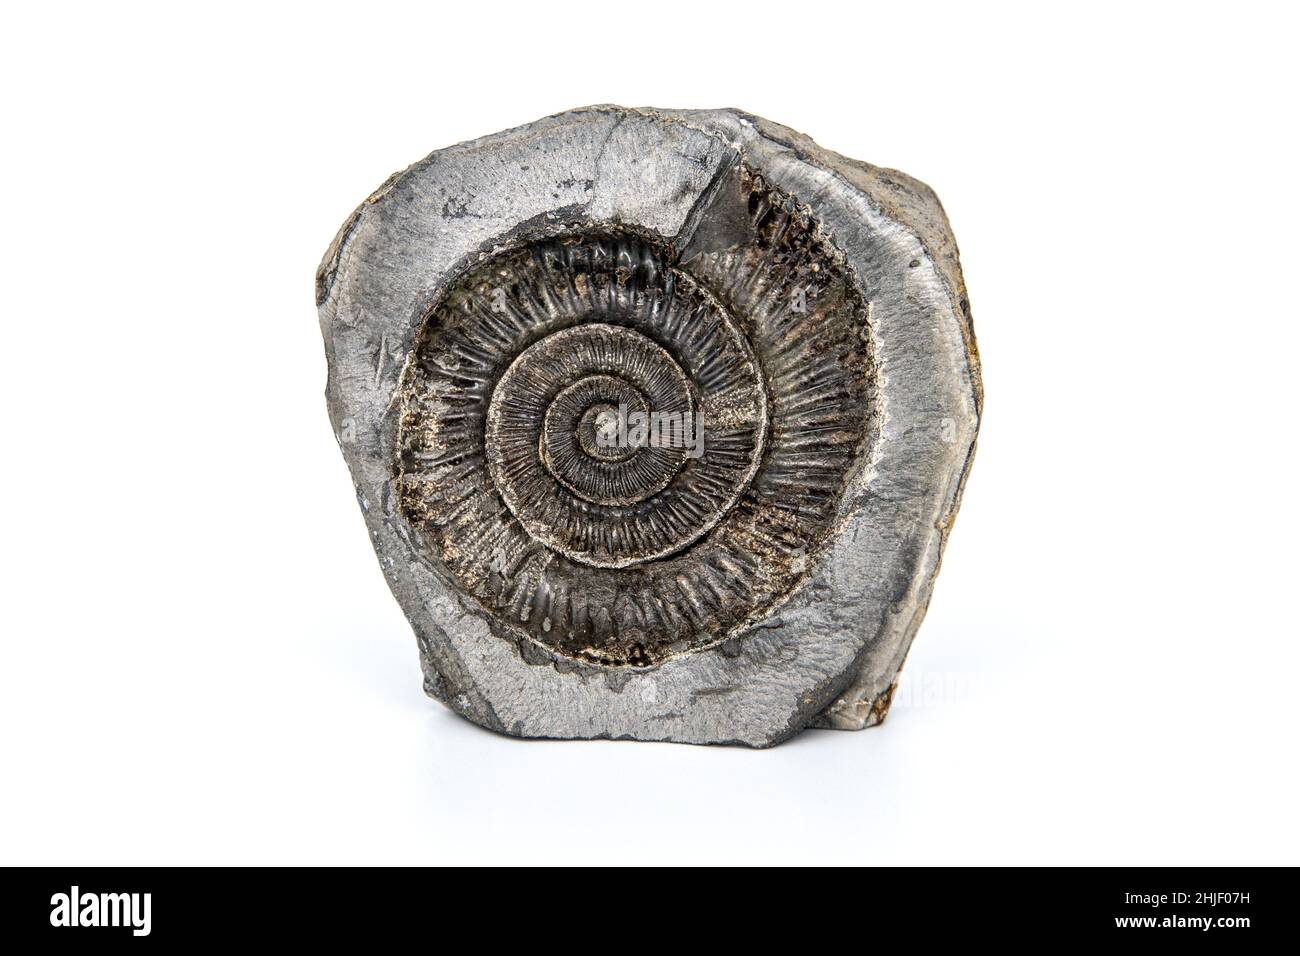 170 million years old Dactylioceras ammonite fossil against white background in studio Stock Photo